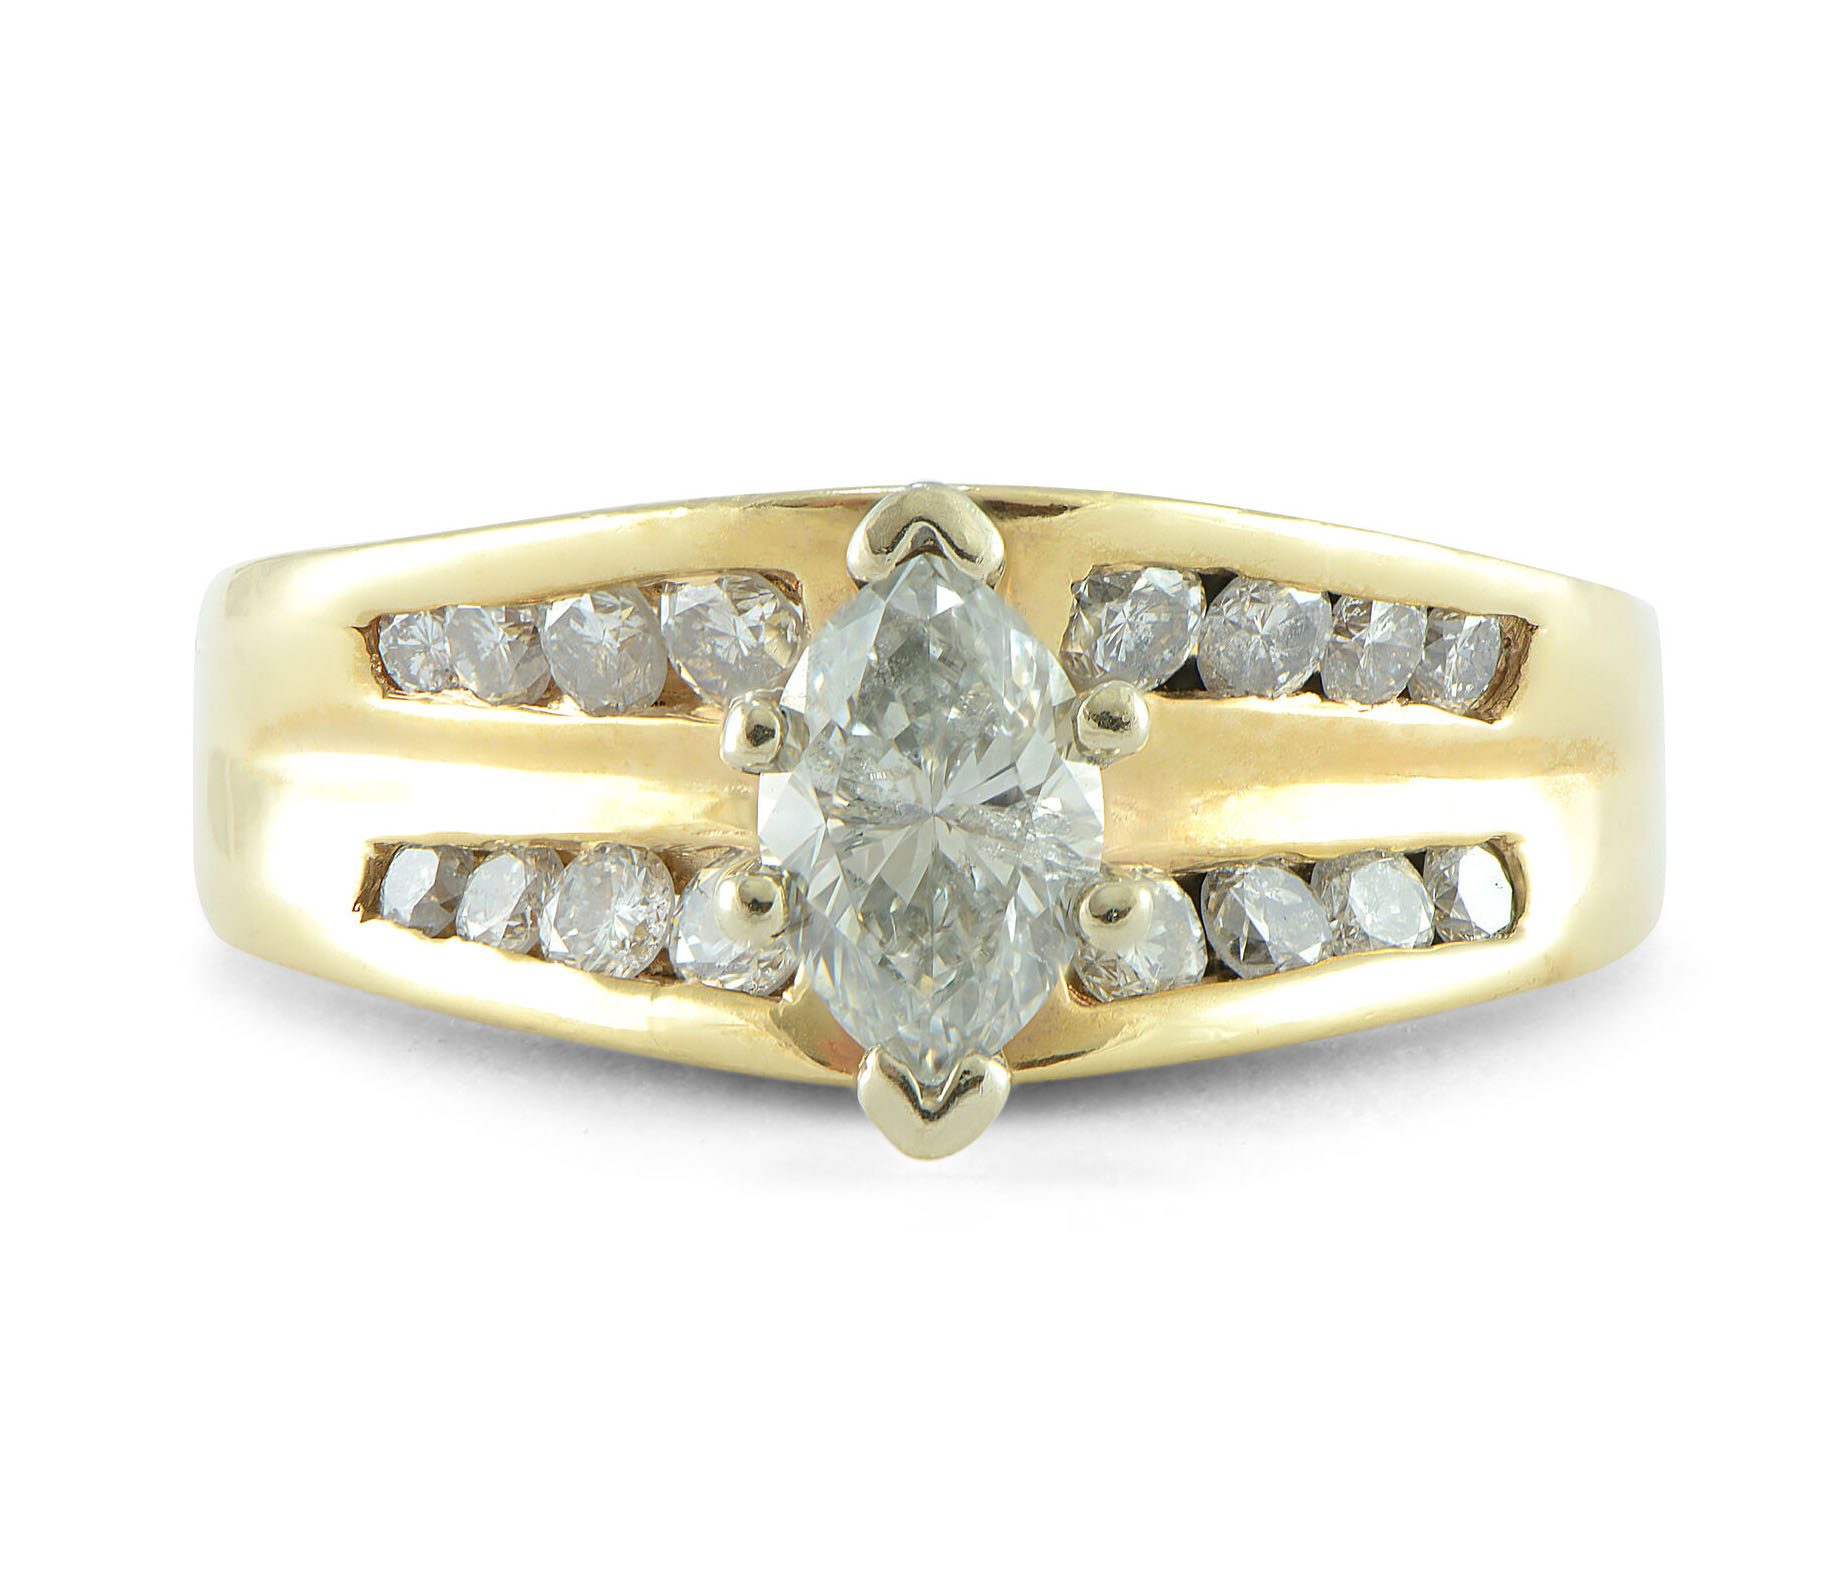 Marquise-Diamond-Engagement-Ring-14k-Yellow-Tapering-Channel-Set-1ct-TW-I1-SZ65-172745558308